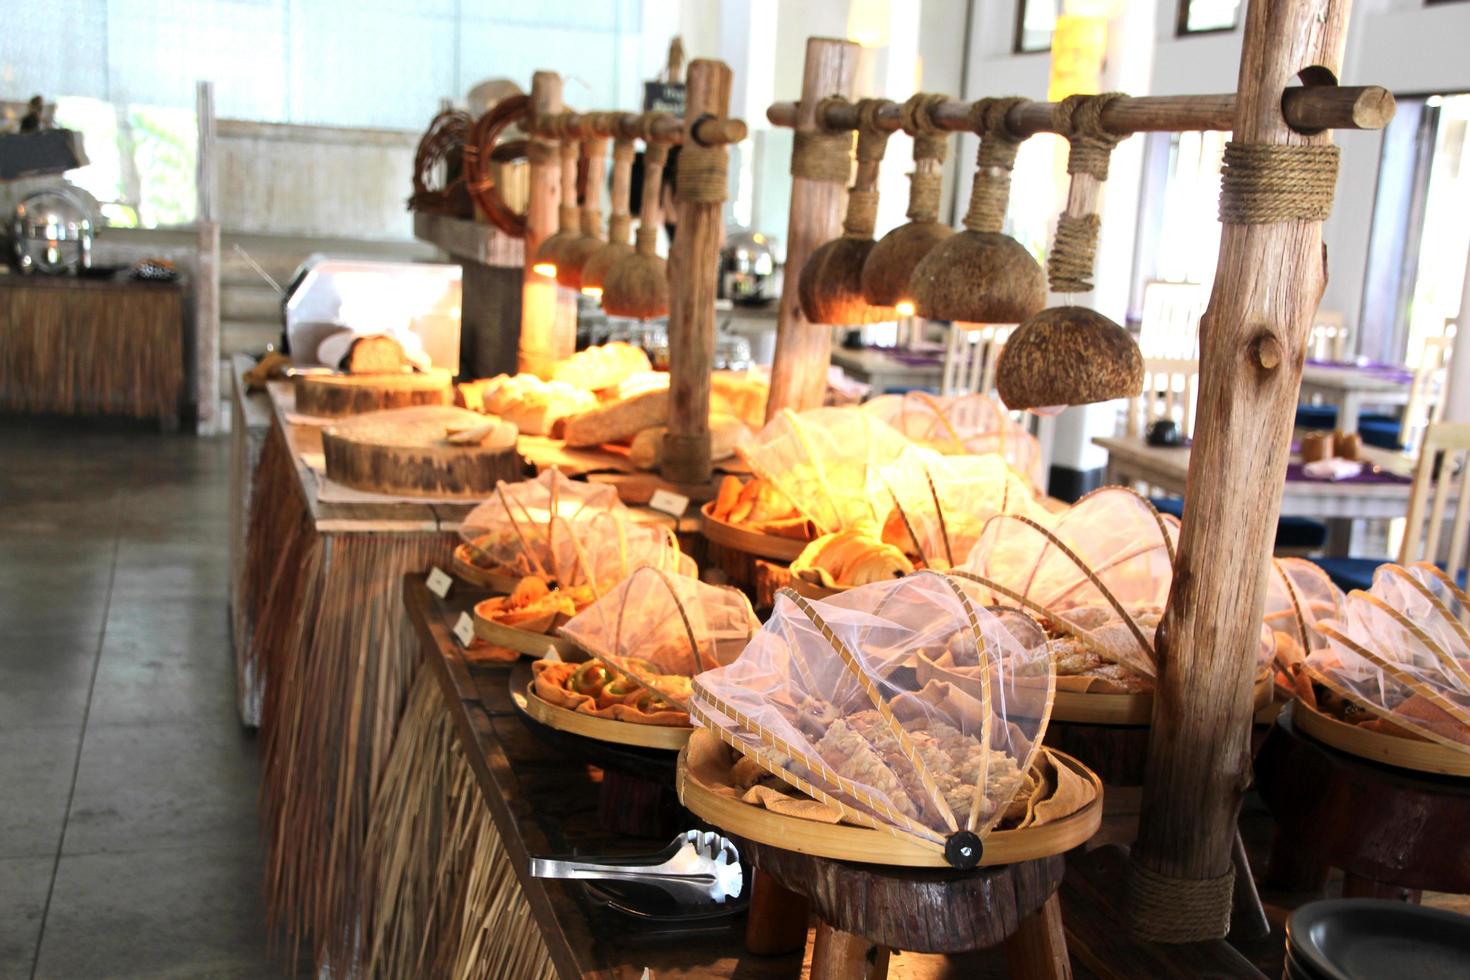 Bakery bar counter service. Full of bread and pastry product for customers. photo